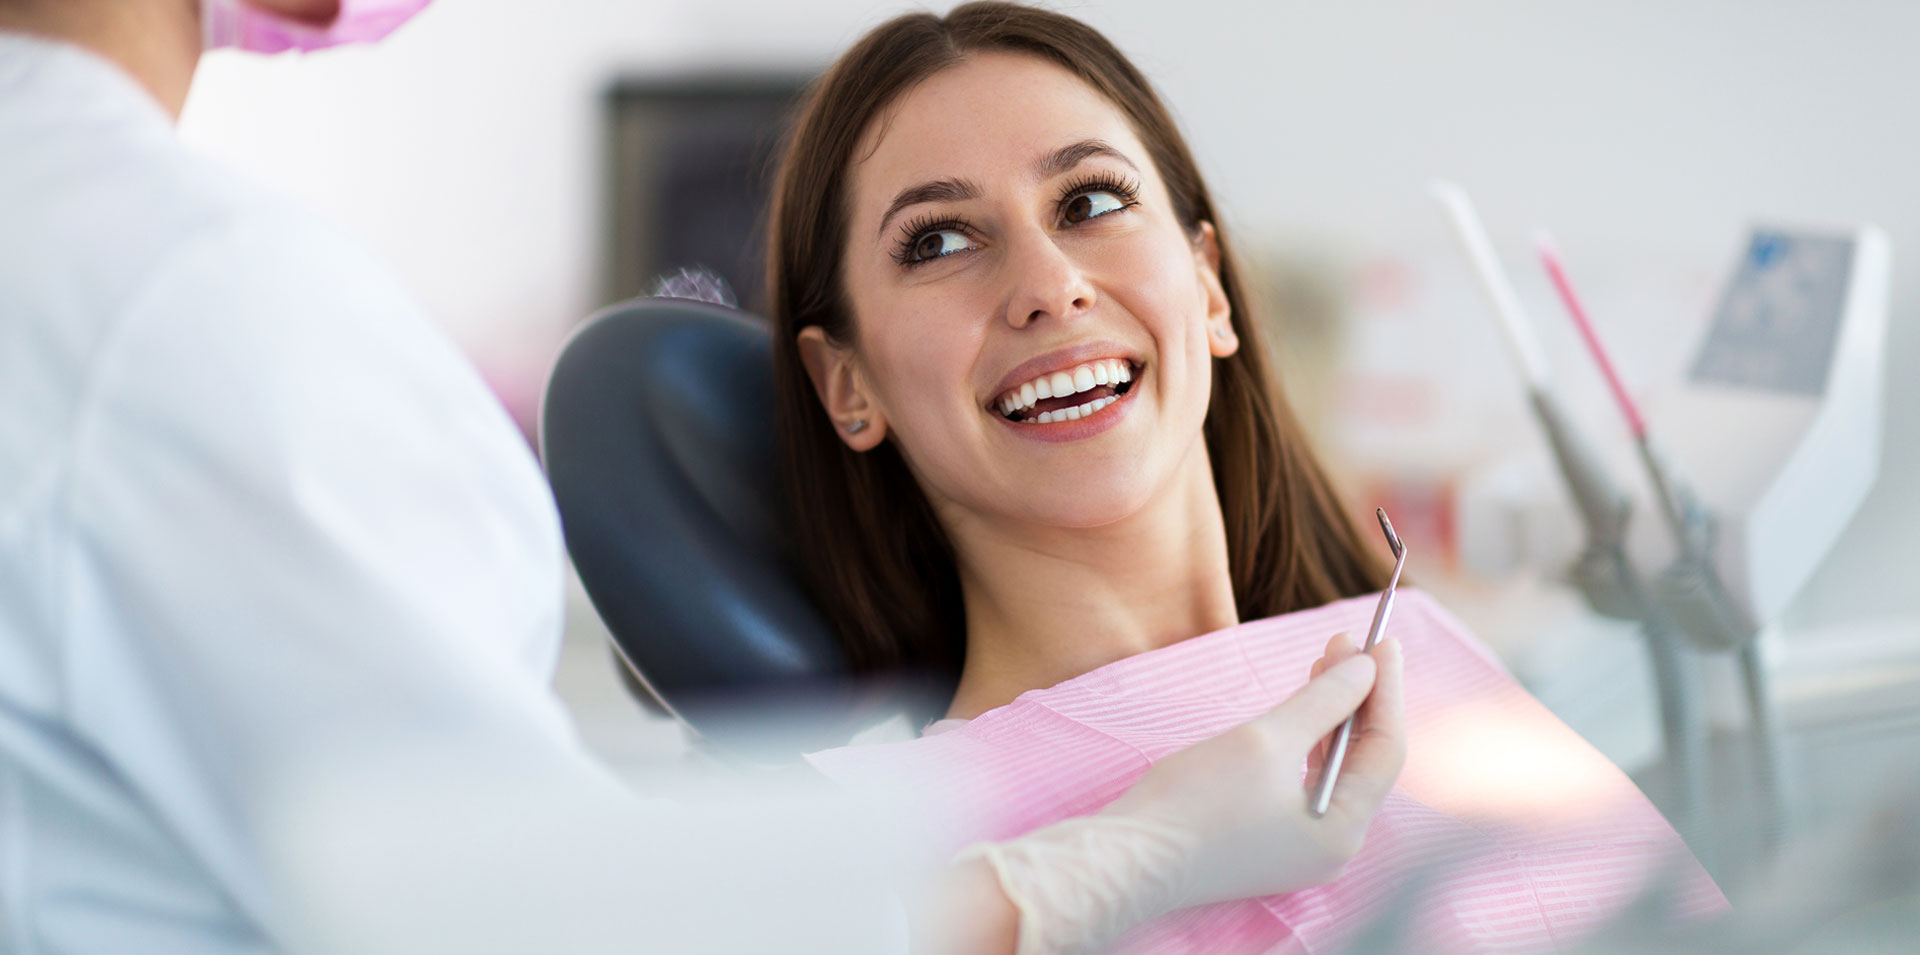 Smiling woman sitting on dental chair